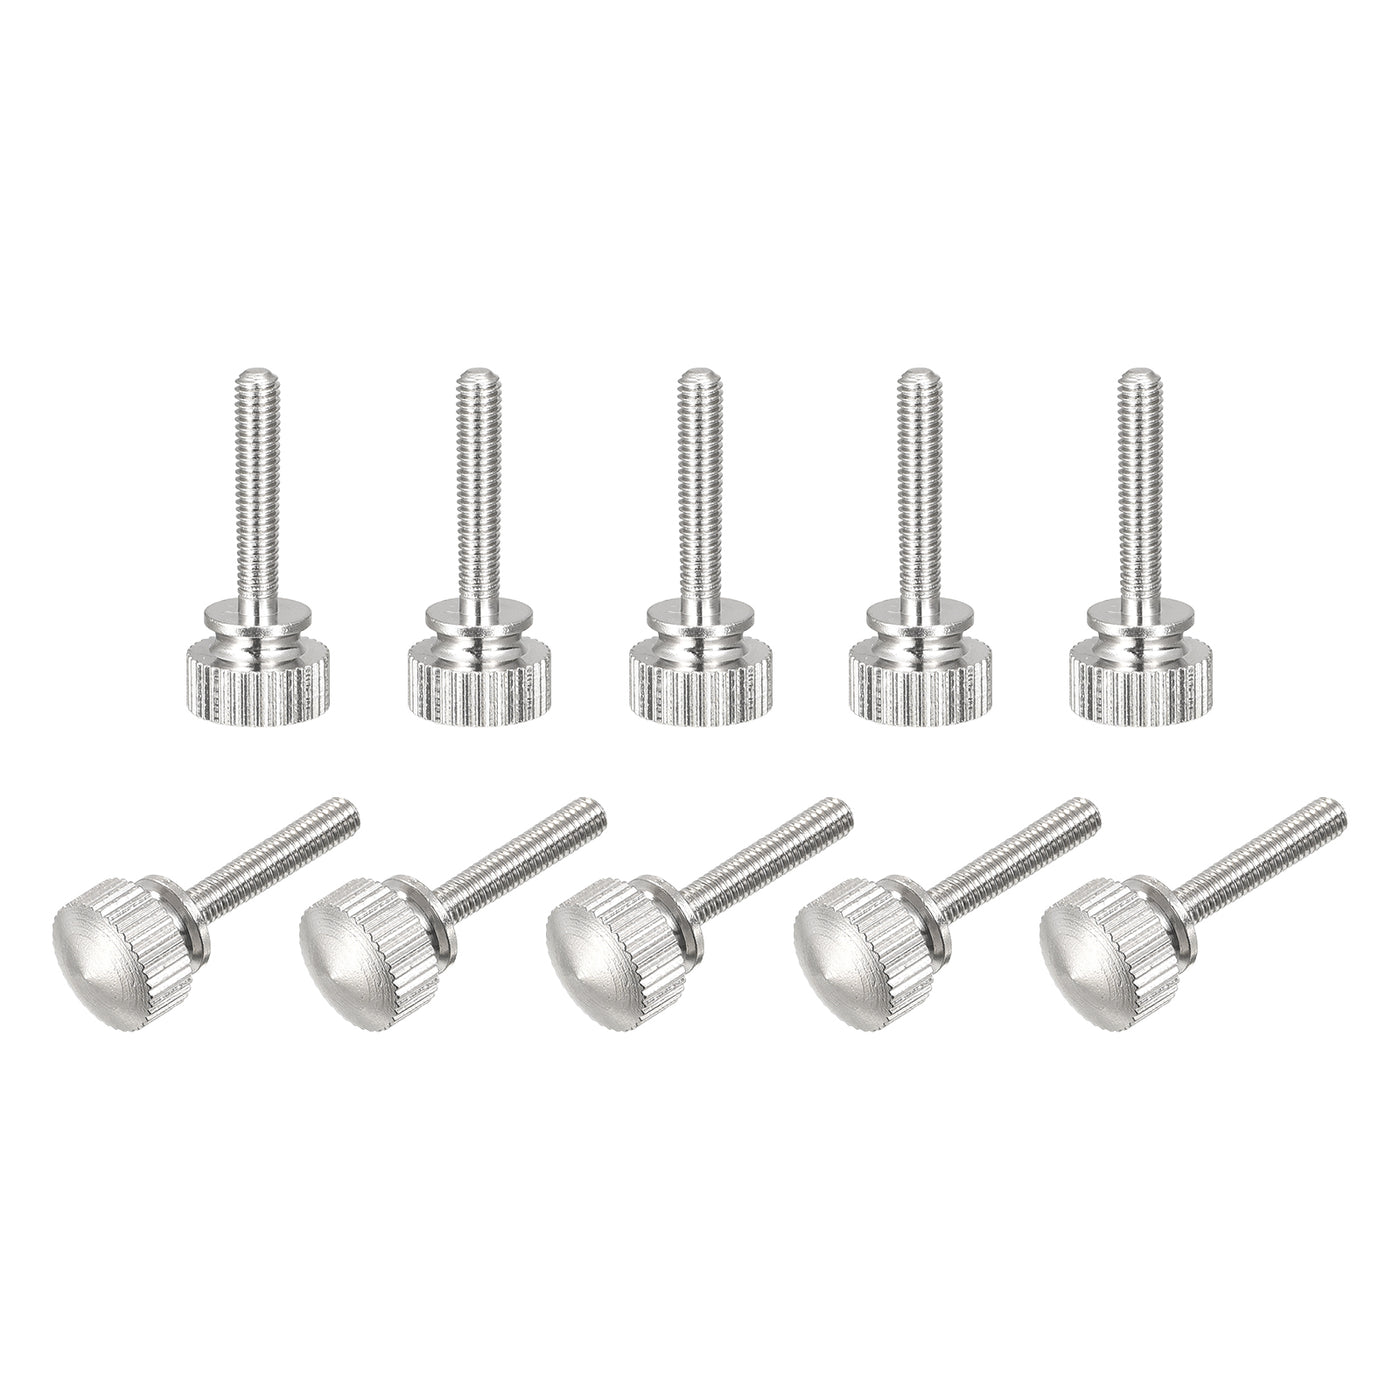 uxcell Uxcell Knurled Thumb Screws, M3x16mm Brass Shoulder Bolts Grip Knobs Fasteners, Nickel Plated 10Pcs